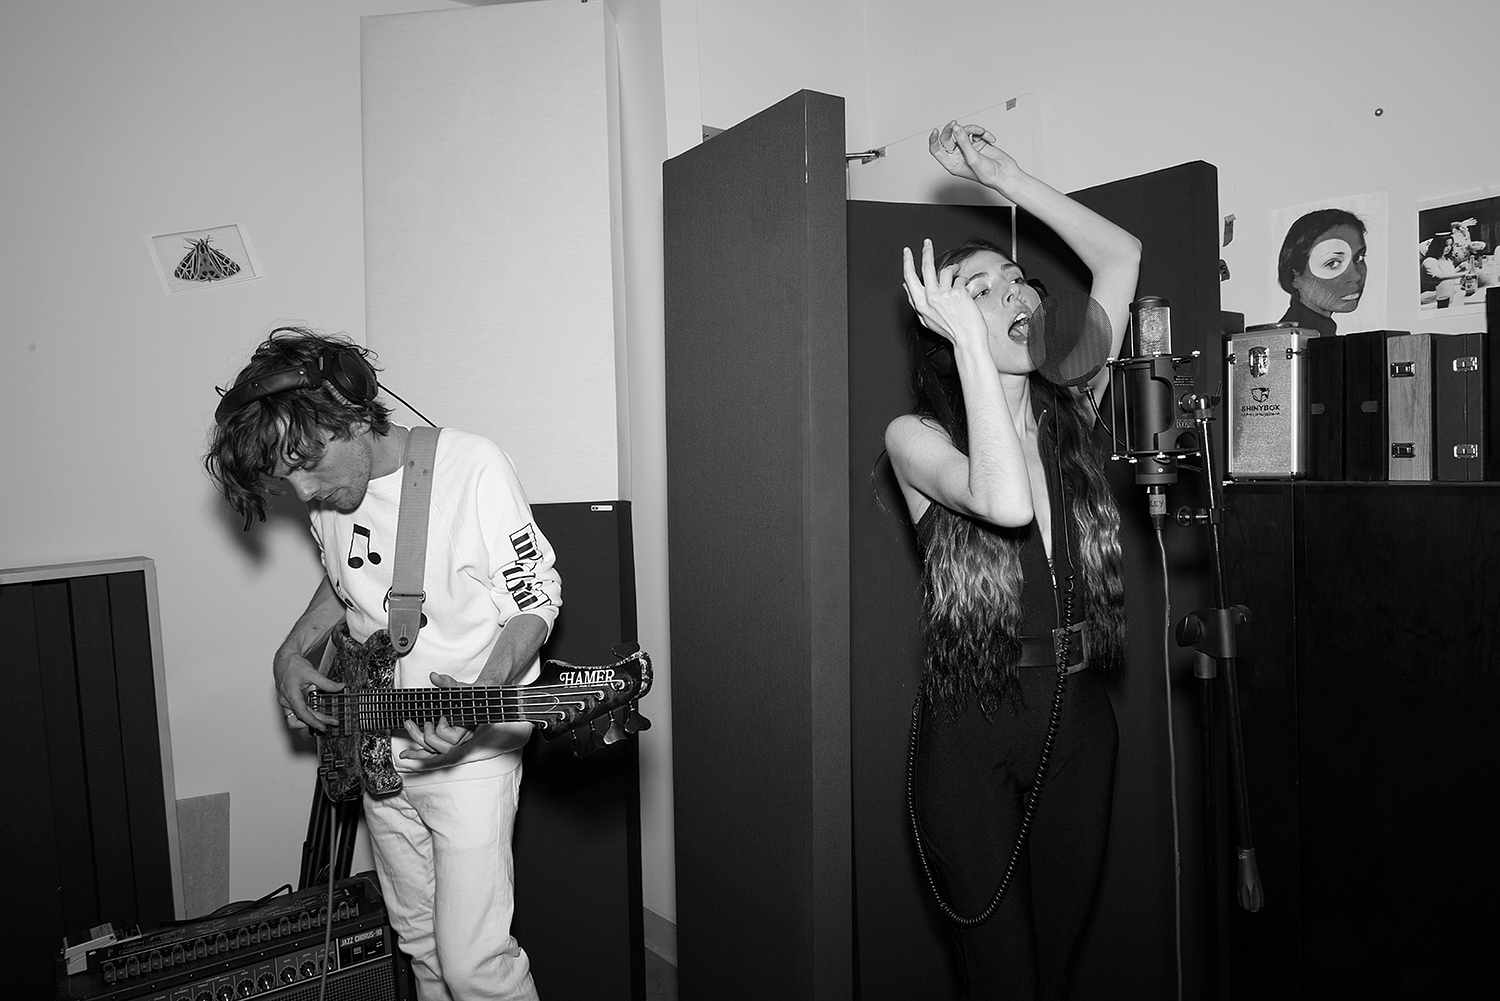 Chairlift: "I had a sound in my head that was different to anything we had done before"